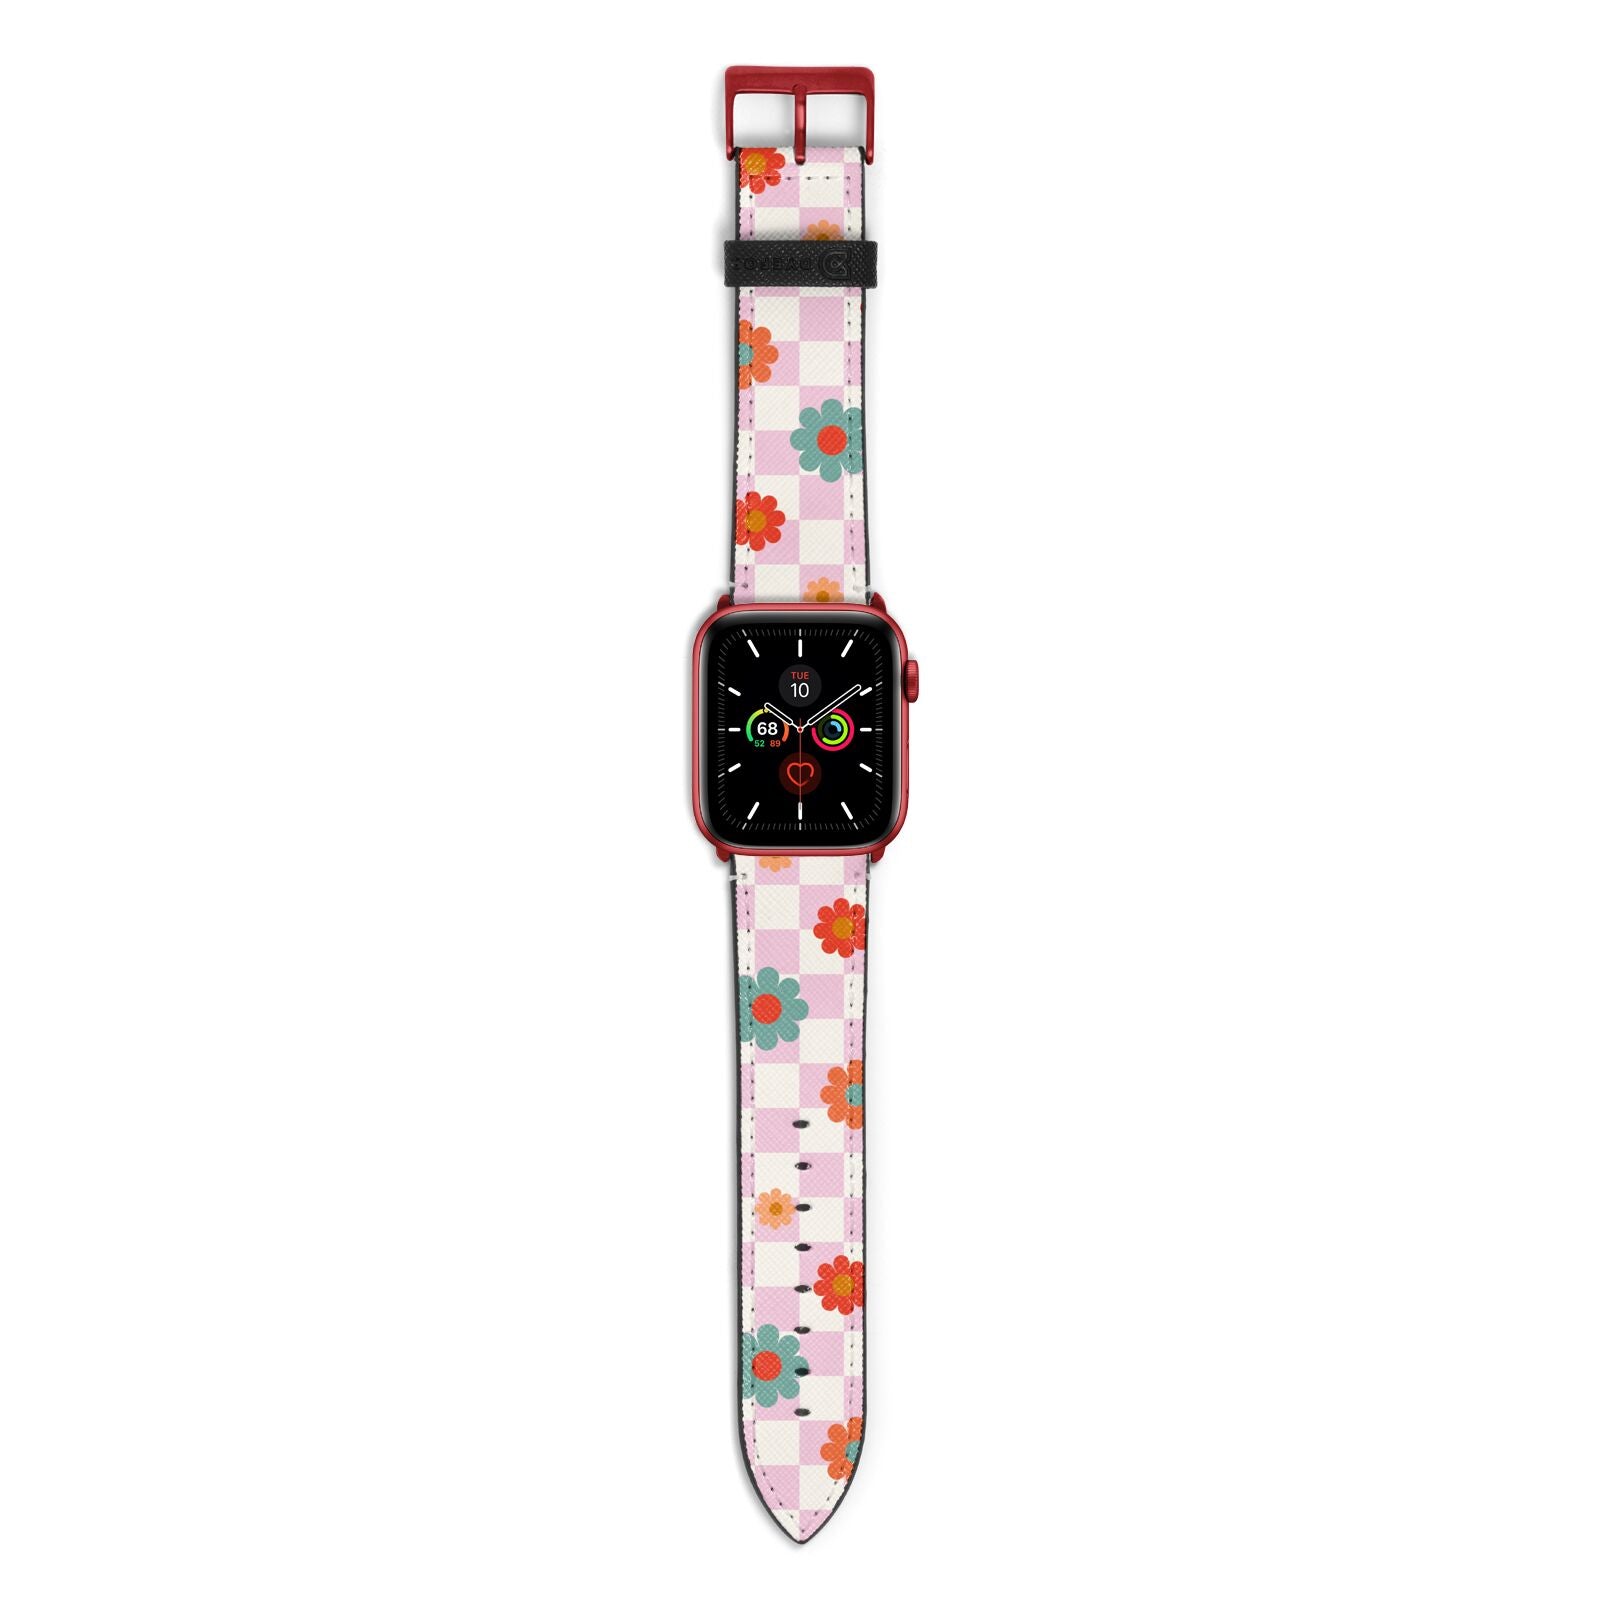 Flower Power Apple Watch Strap with Red Hardware